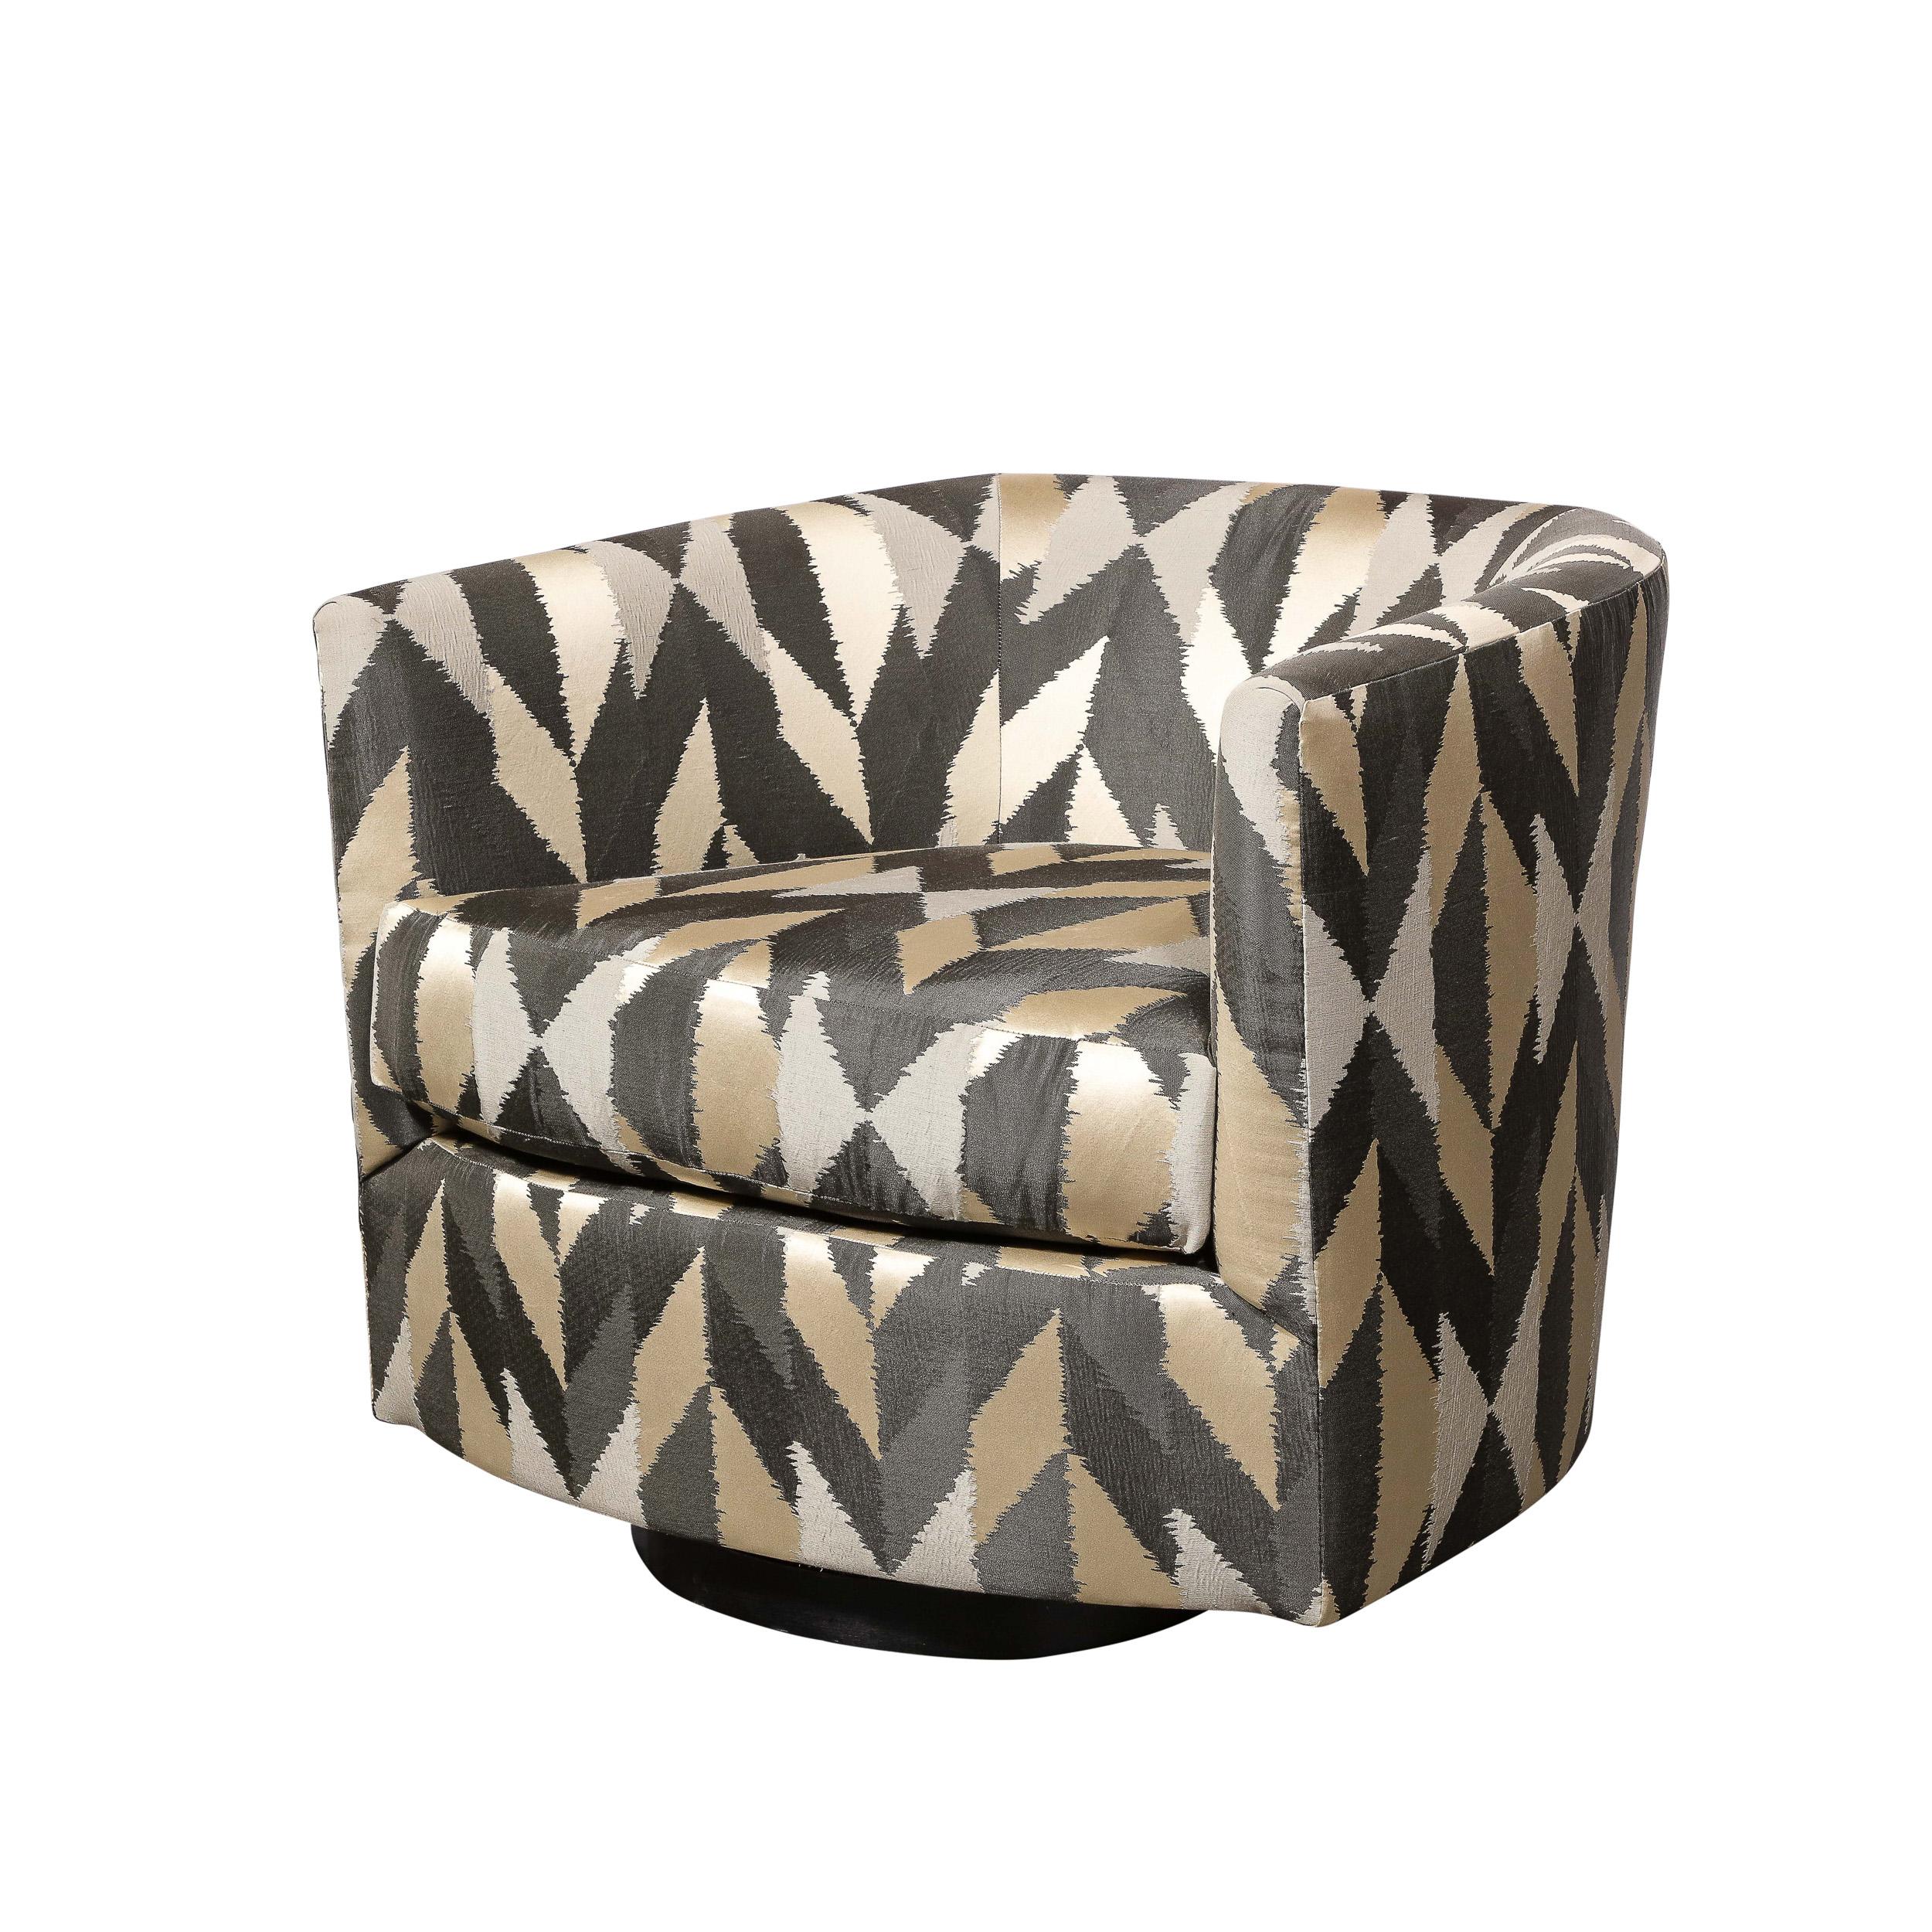 An excellent example of mid-century modern design and craftsmanship, this pair of swivel chairs features a beautifully coordinated fabric with staggered geometric pattern and silver, pewter, and pale gold tones. These chairs are characteristic of